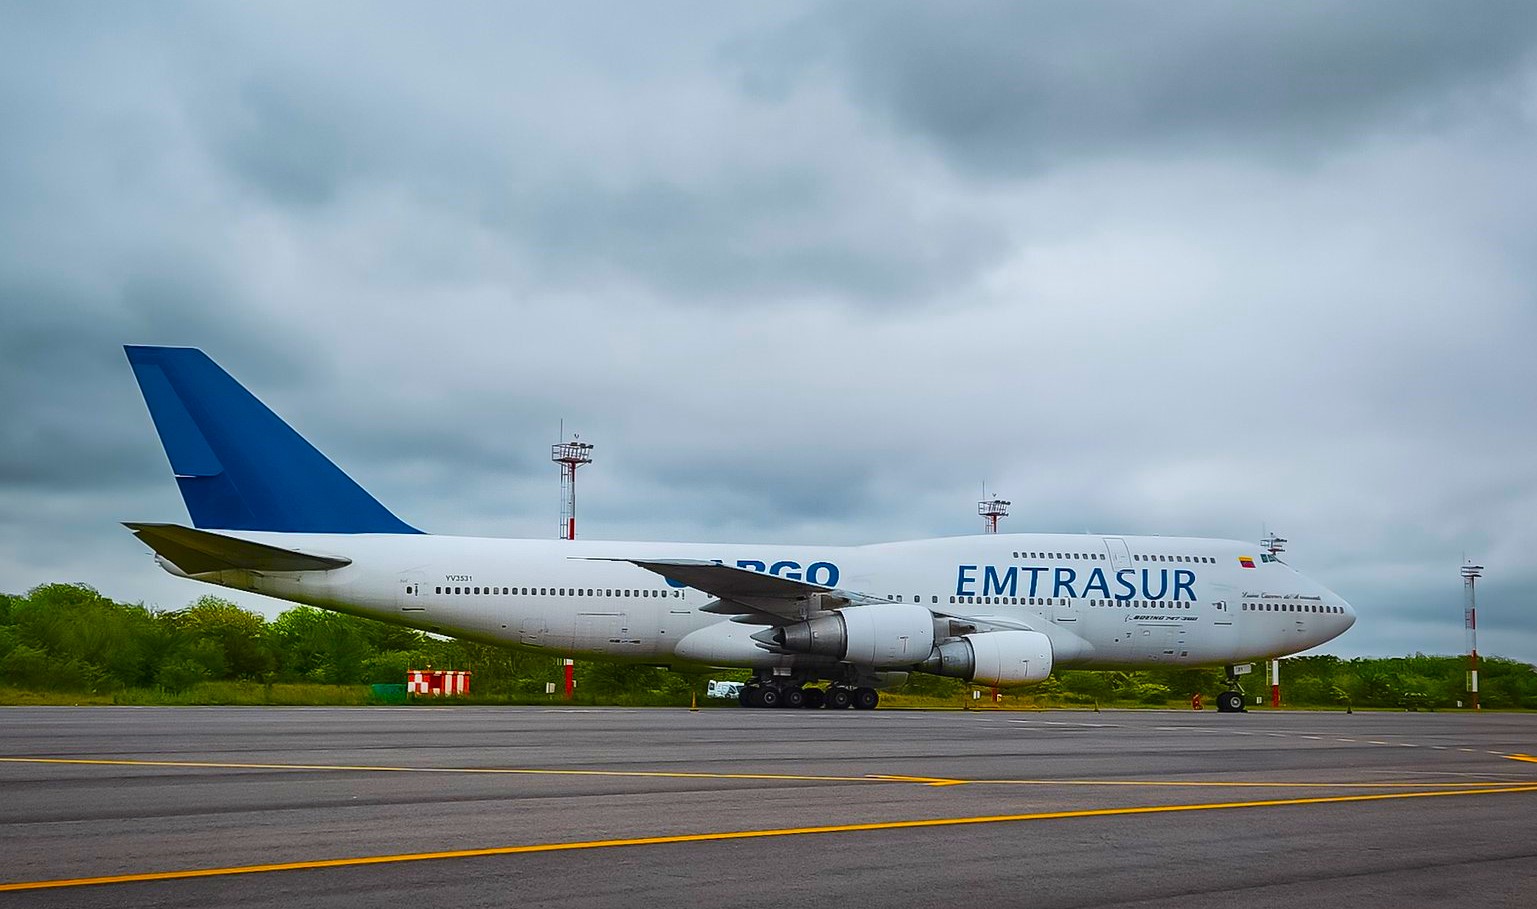 ICAO has agreed to review Venezuela's claim against Argentina regarding the Emtrasur B747 freighter Seizure.